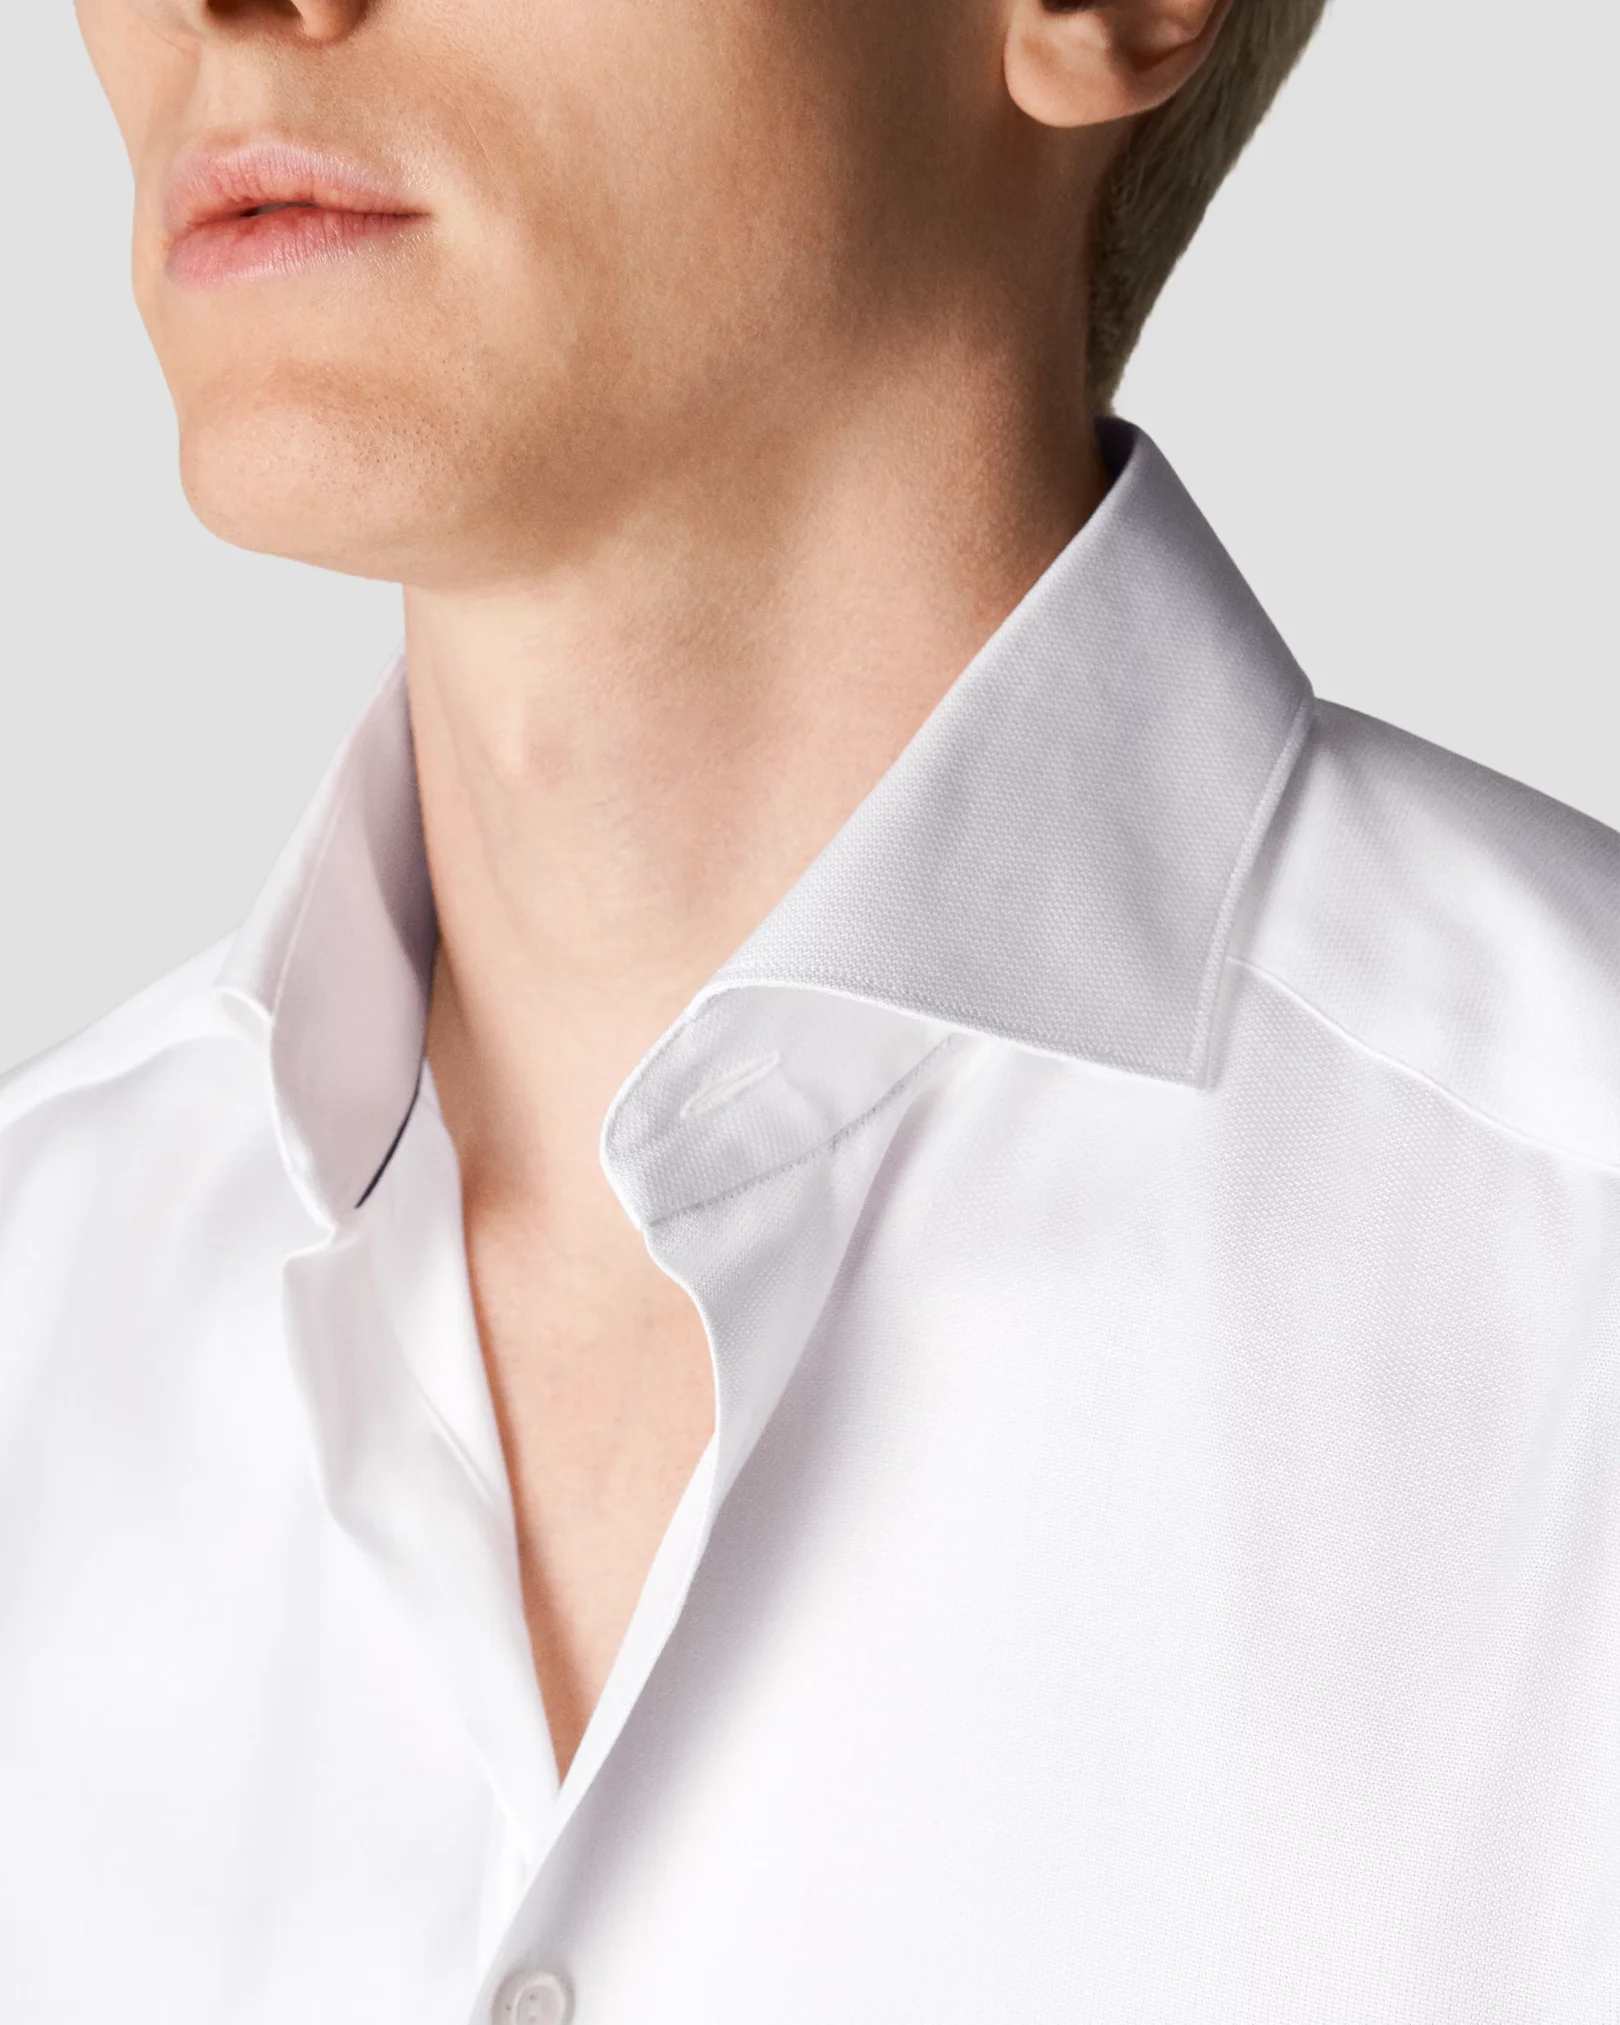 Eton - white cotton lyocell stretch wide spread rounded single one buttonhole slim